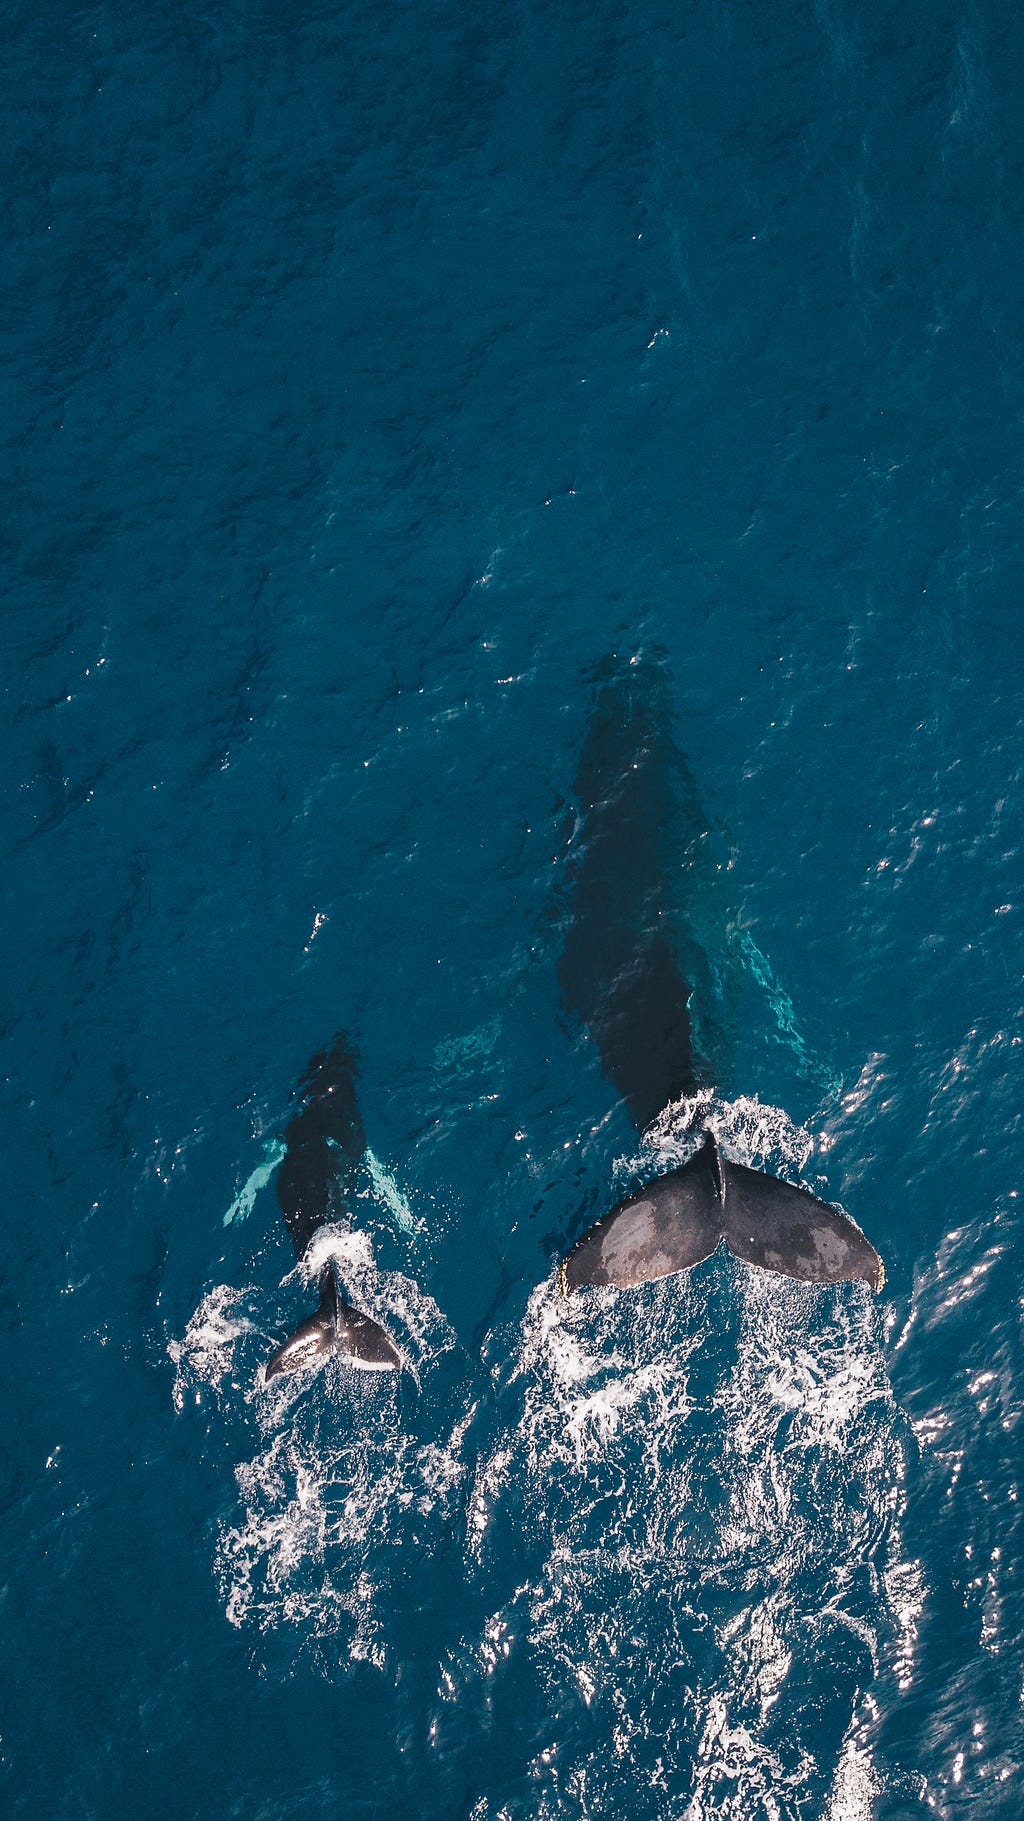 Two whales swimming side by side